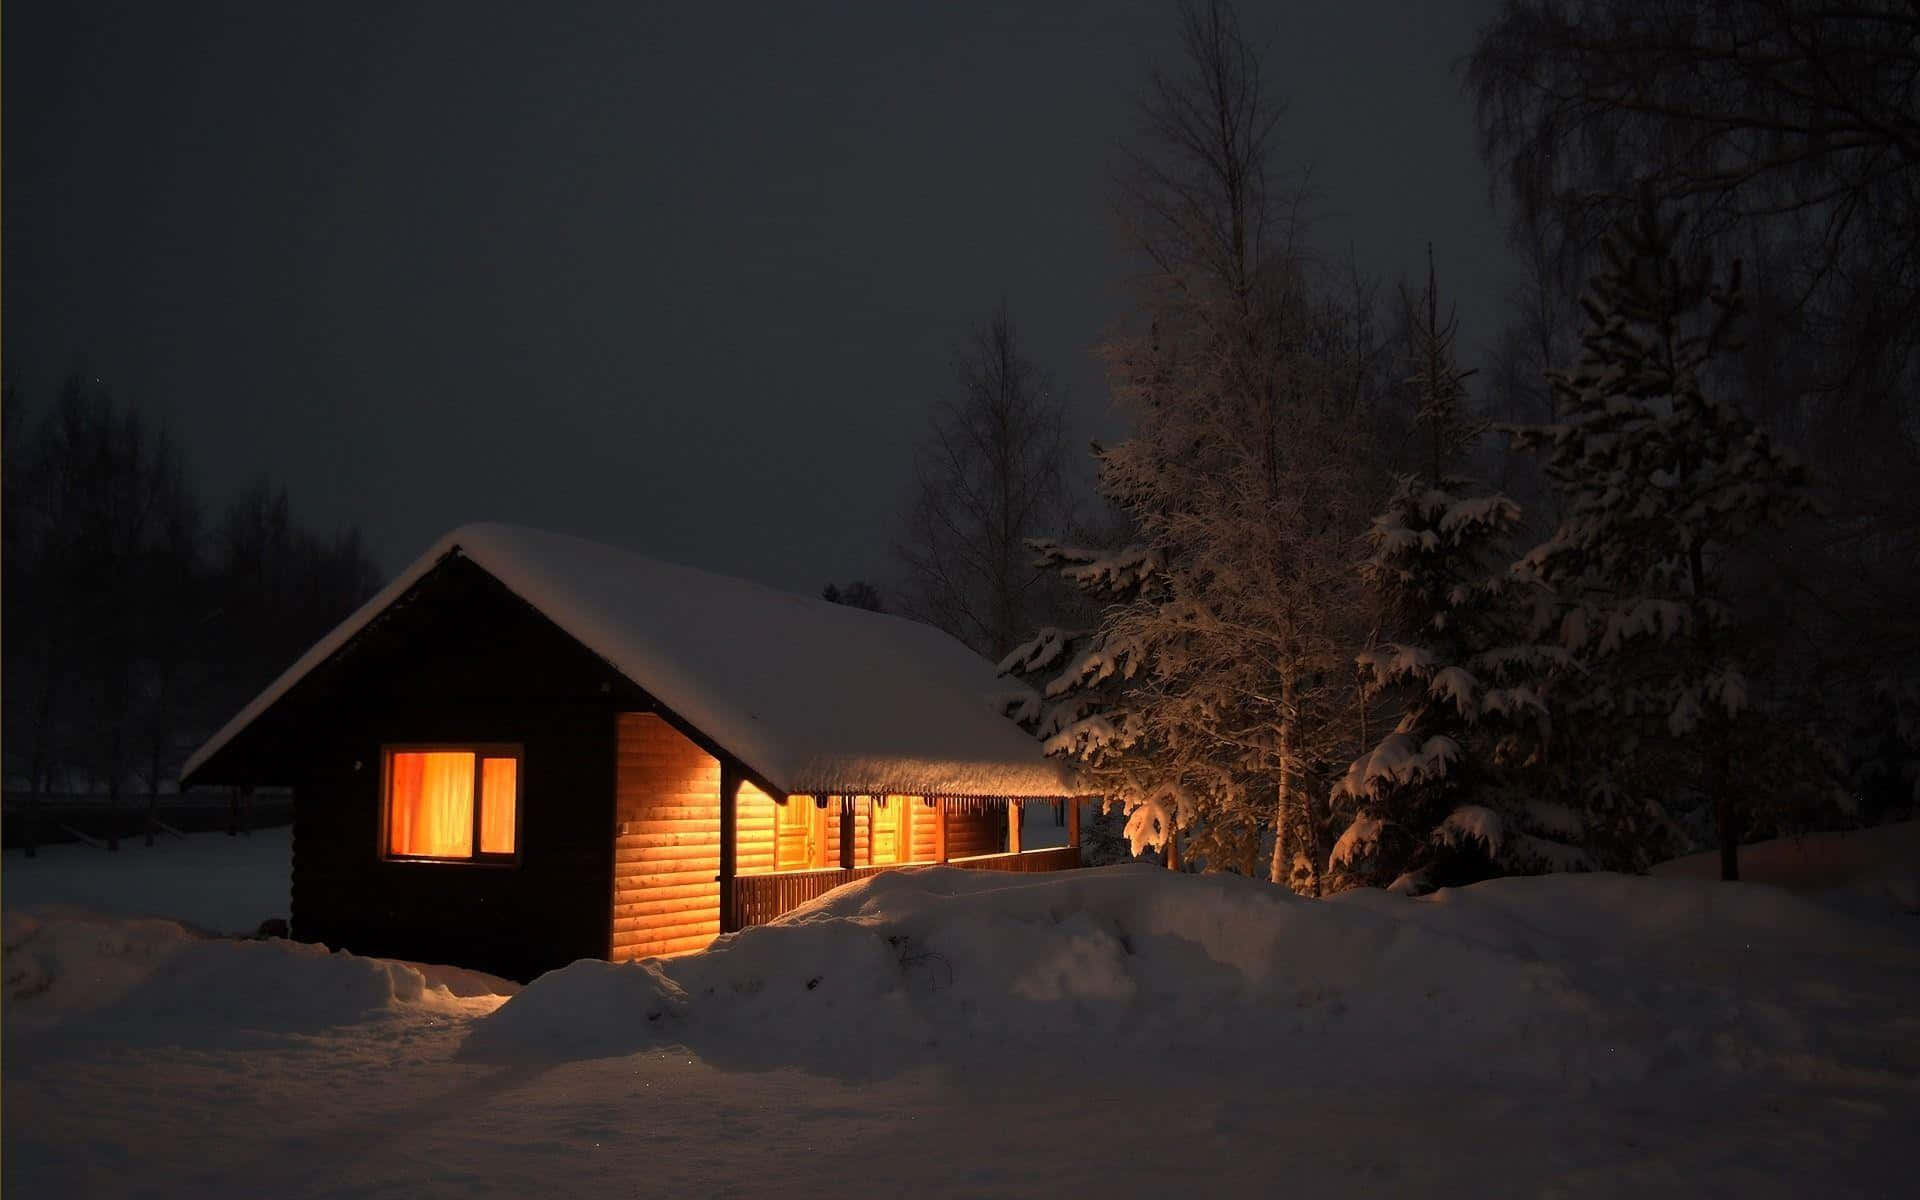 A picturesque winter night captured in nature Wallpaper